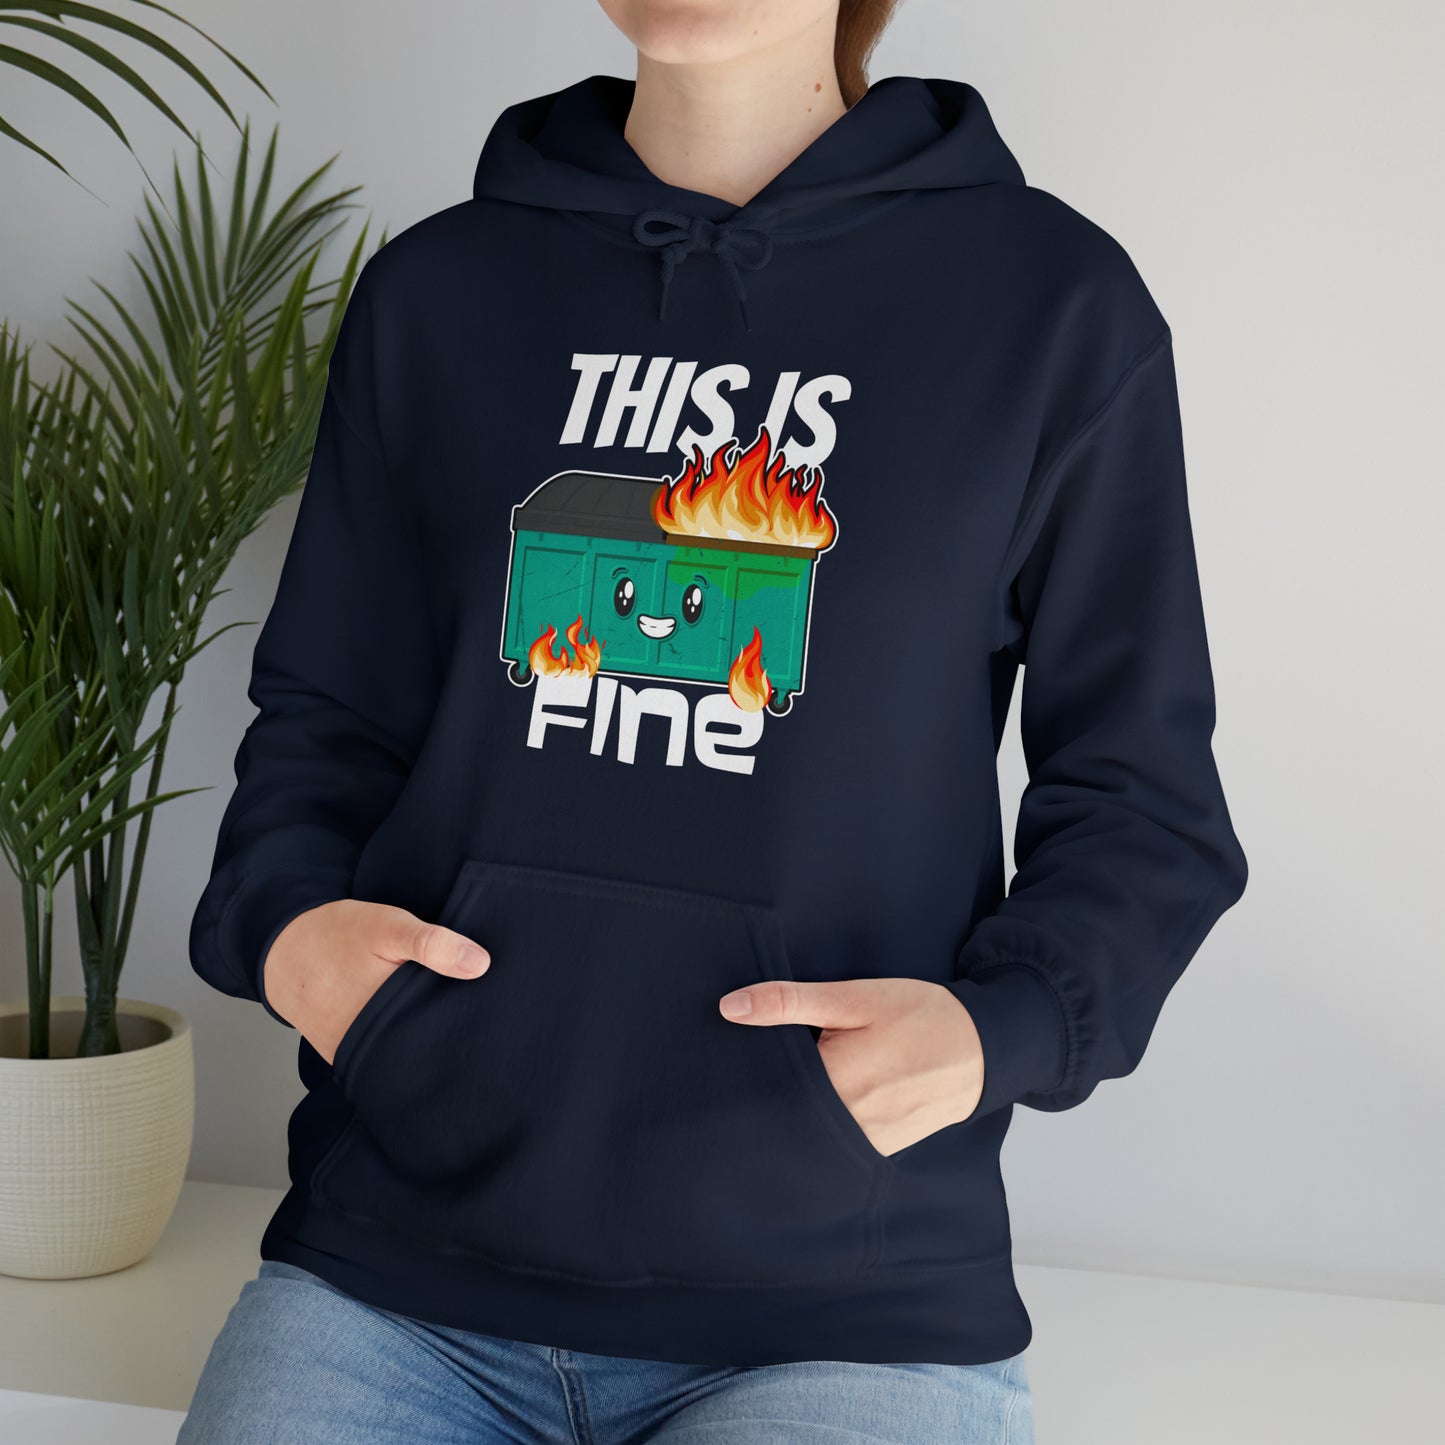 This Is Fine (Dumpster Fire)